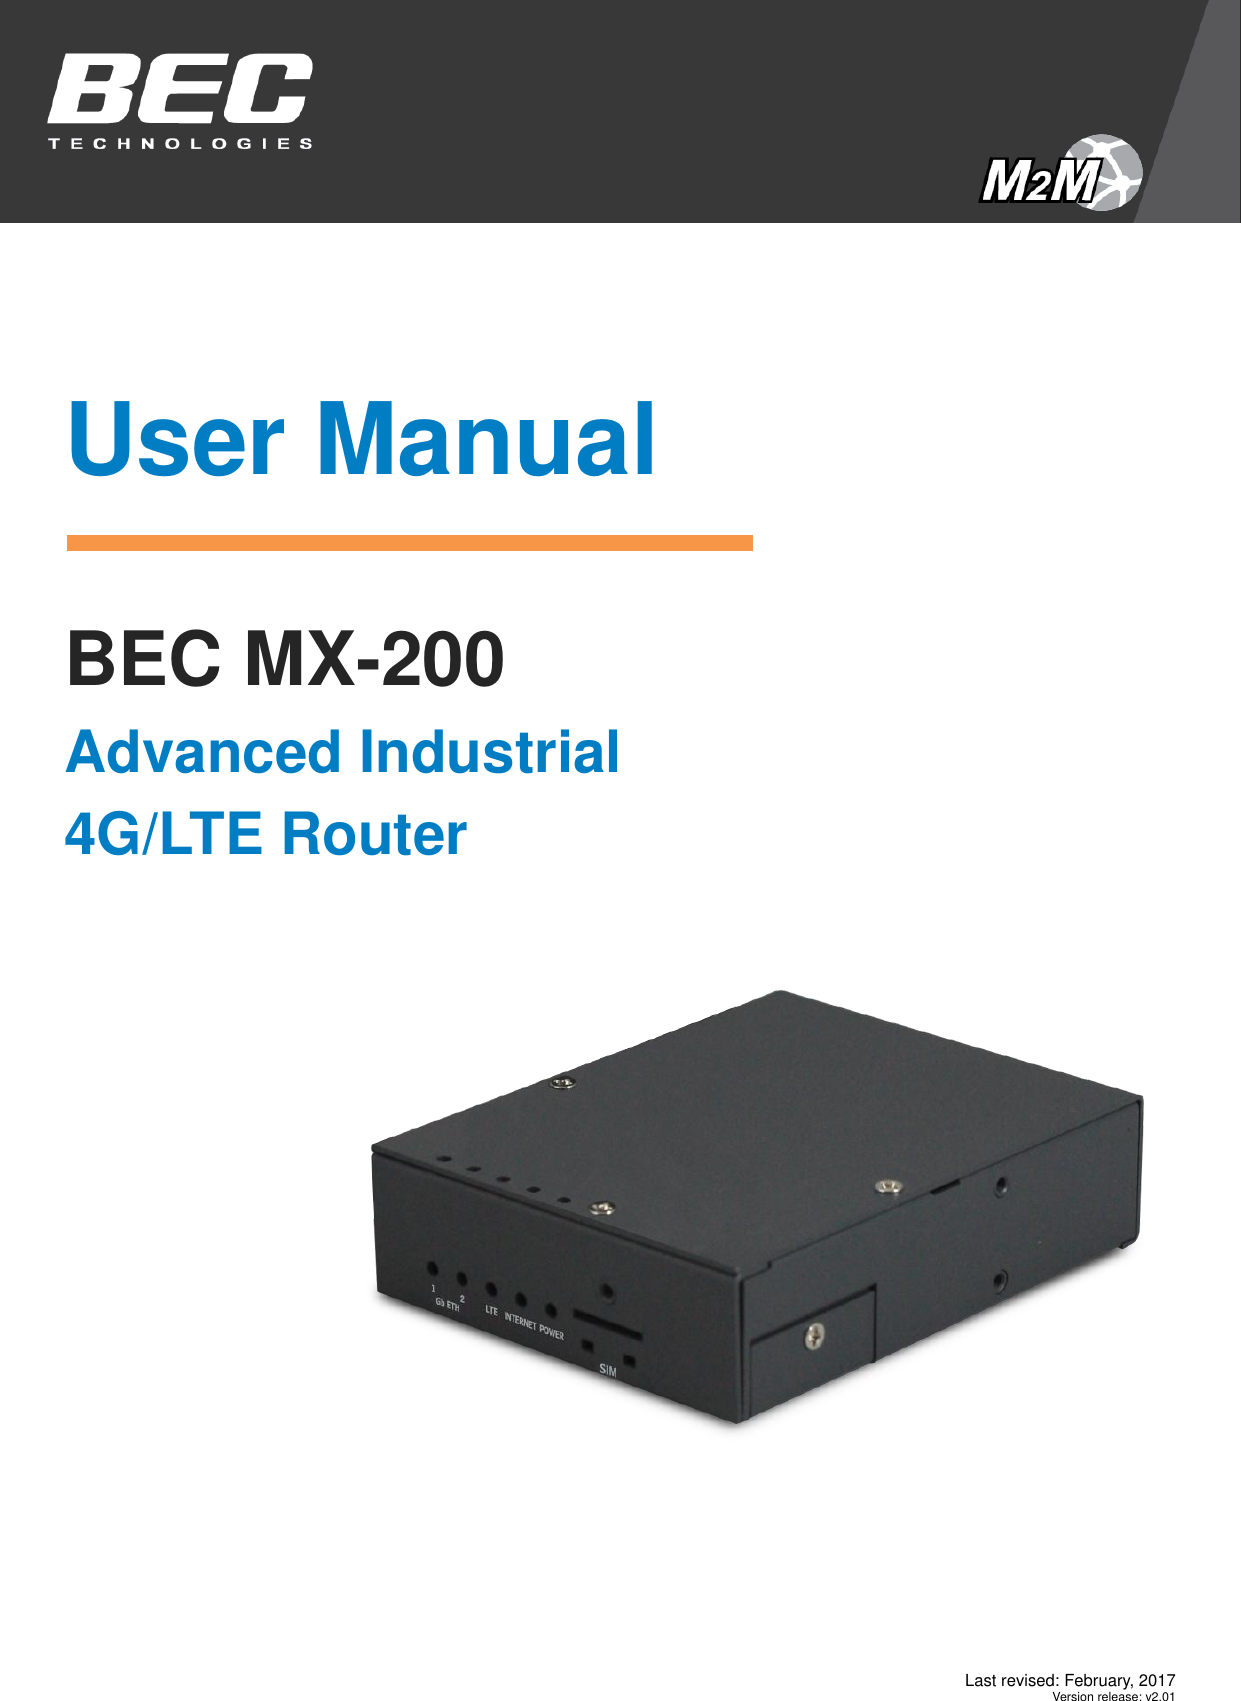  Last revised: February, 2017  Version release: v2.01        User Manual  BEC MX-200 Advanced Industrial  4G/LTE Router              